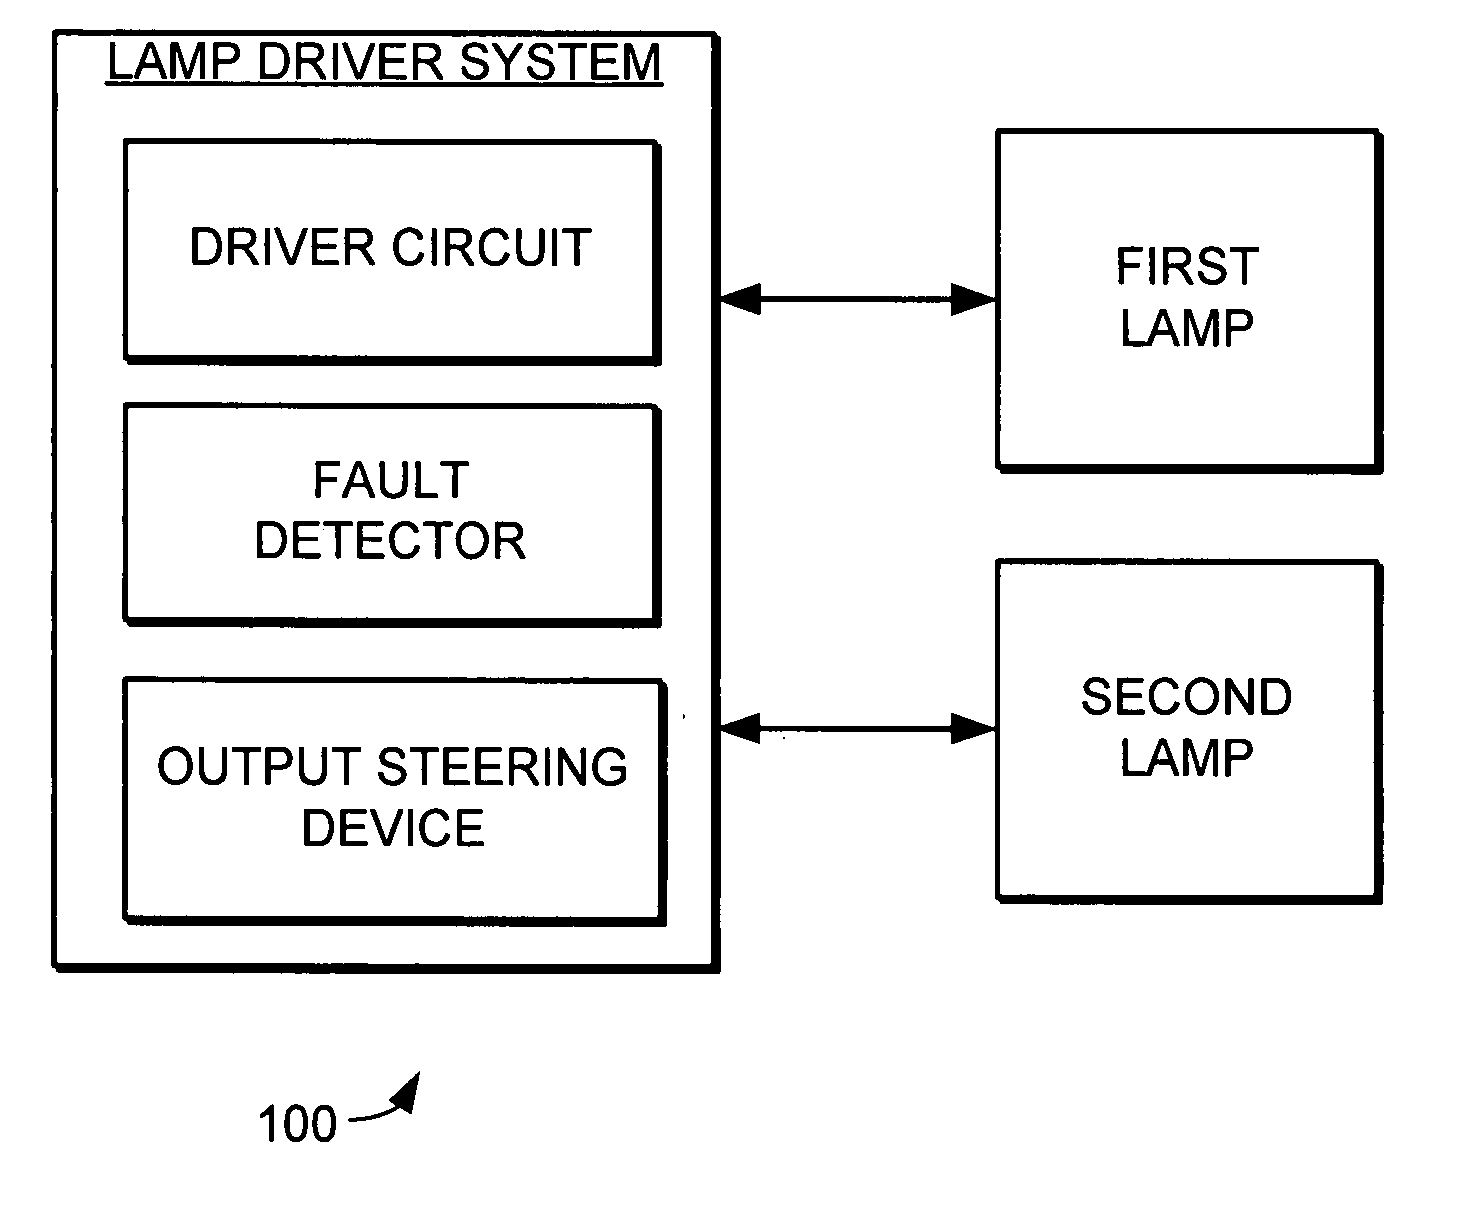 Lamp driver system with improved redundancy